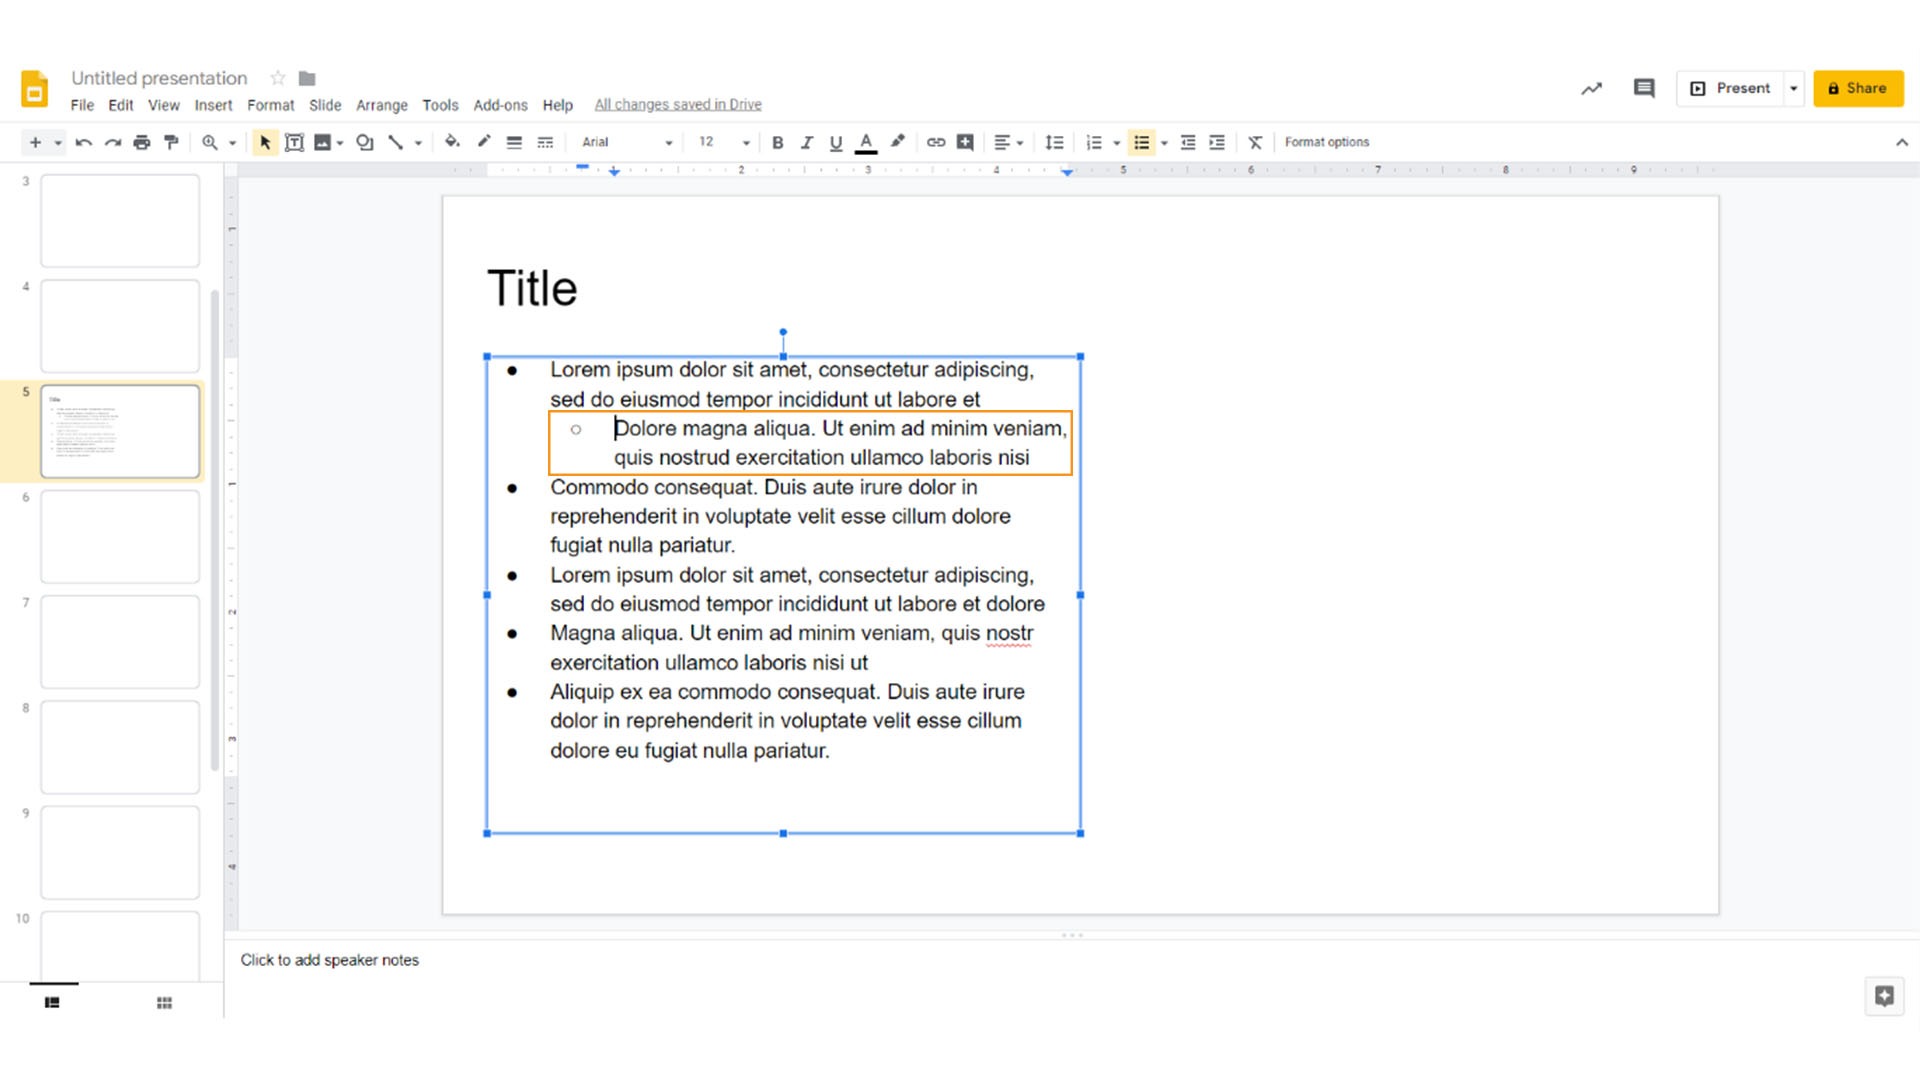 how to edit bullet text formatting in word